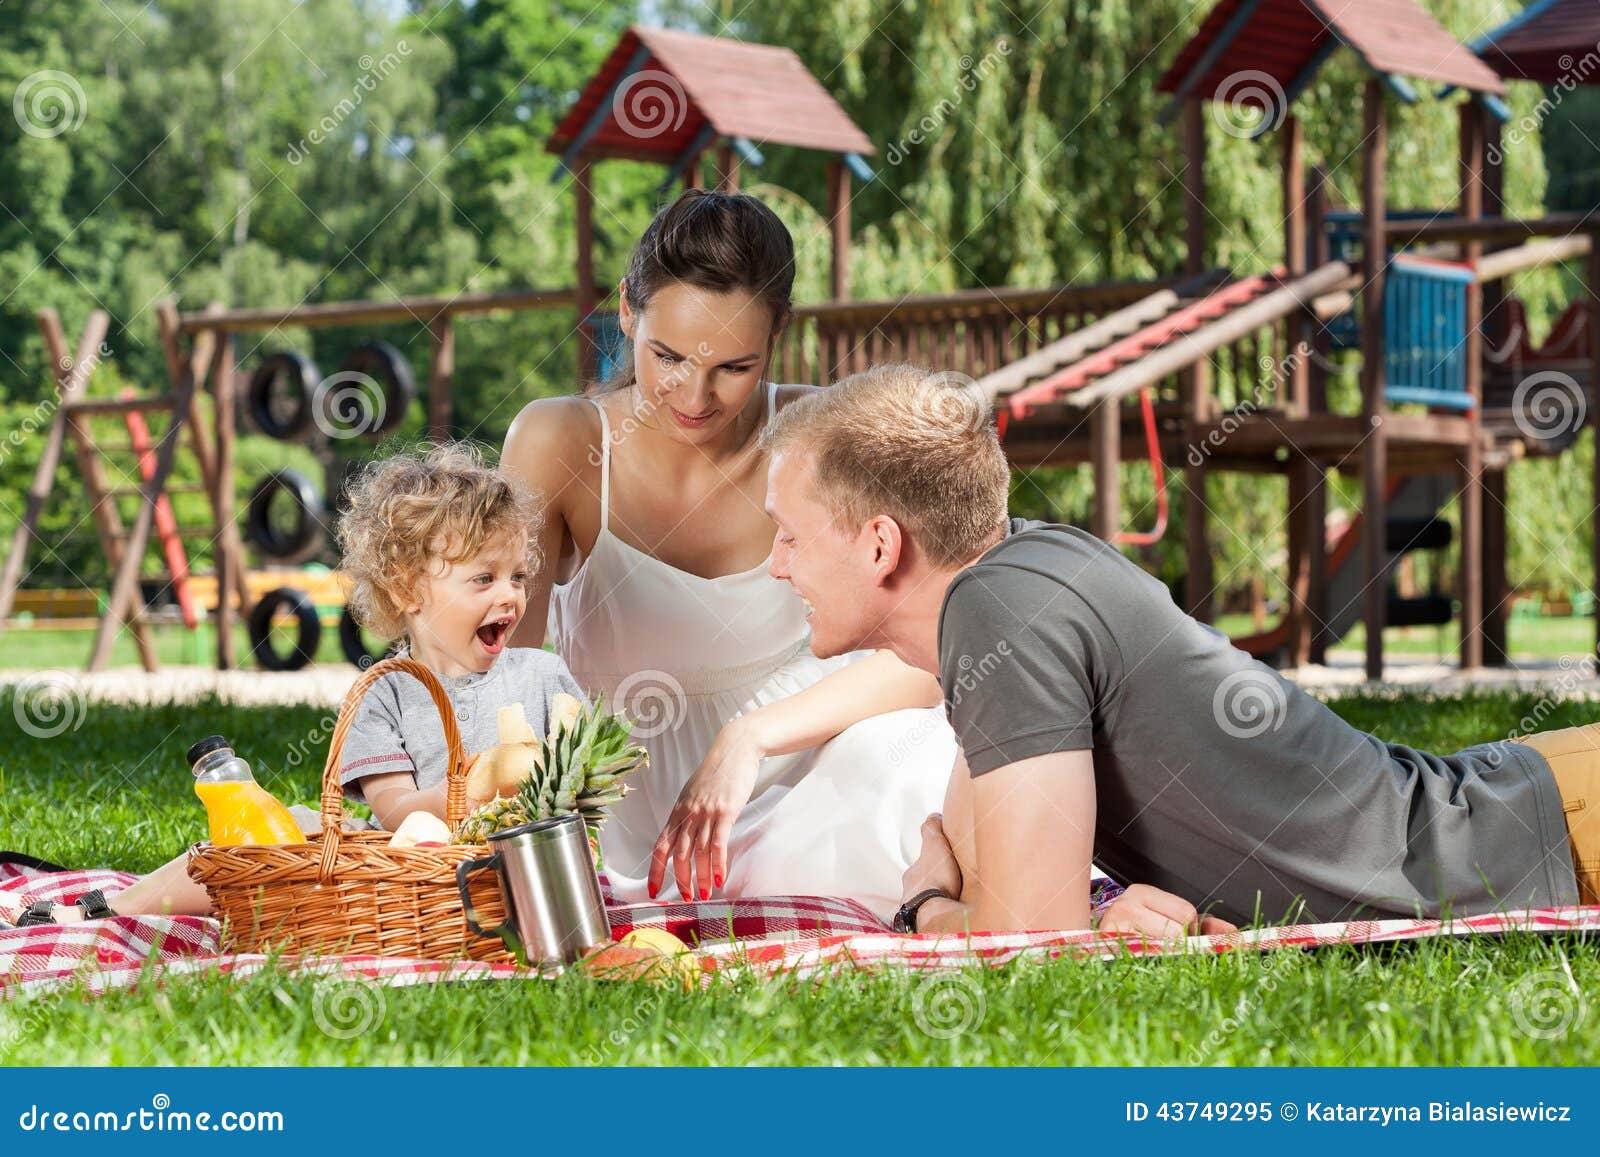 family picnic on the playground